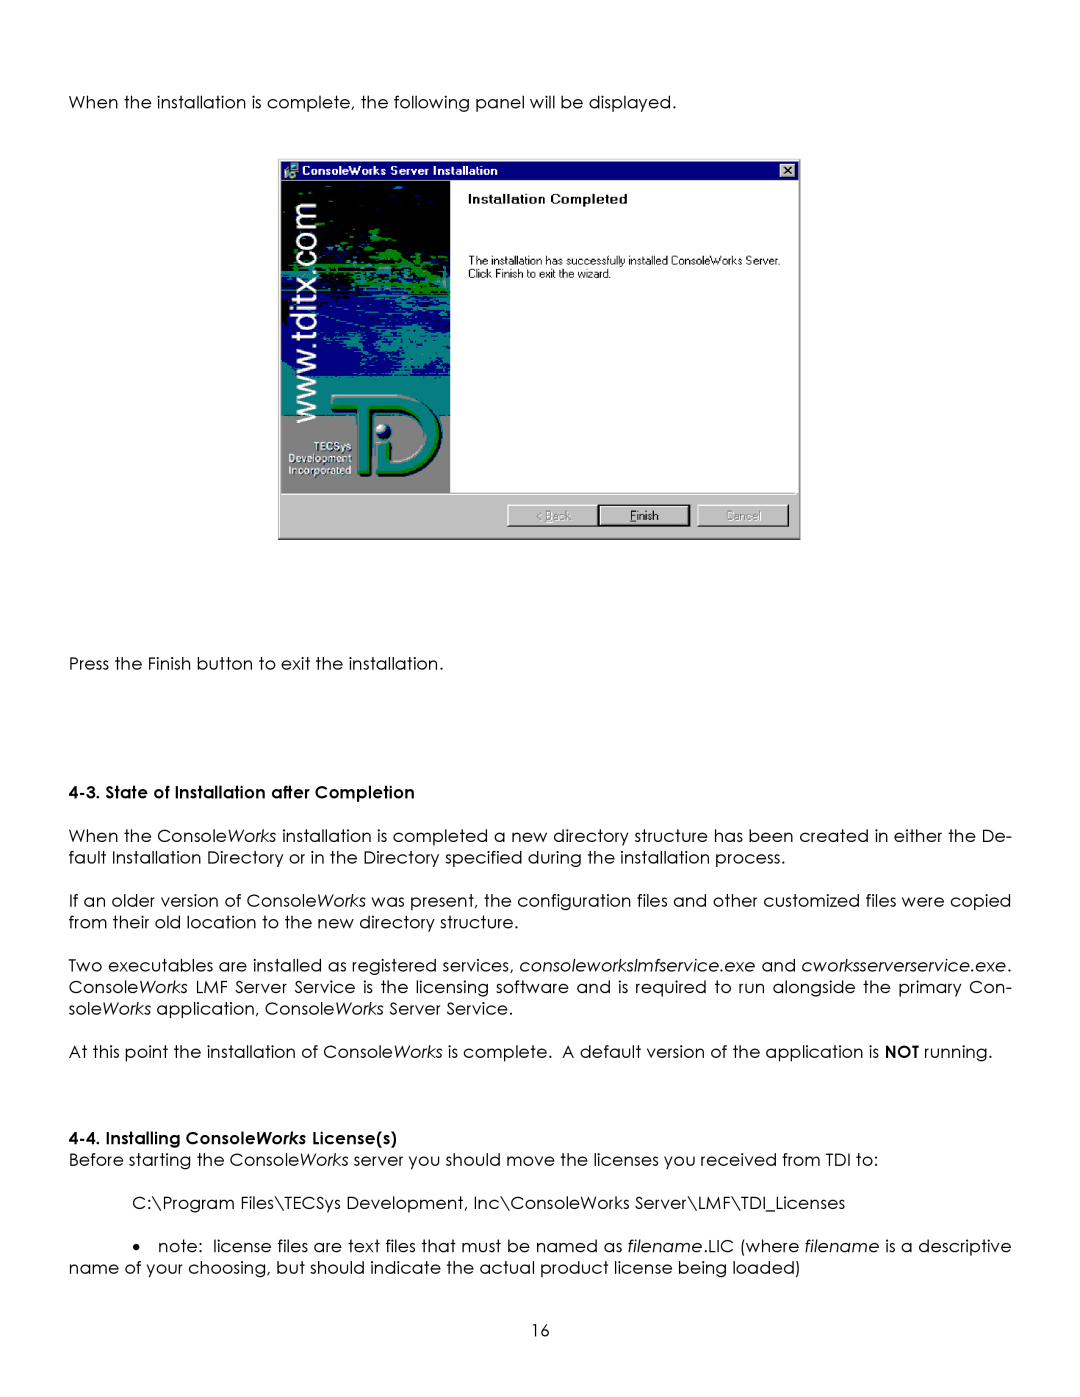 York Version 1.5.0 manual State of Installation after Completion, Installing ConsoleWorks Licenses 